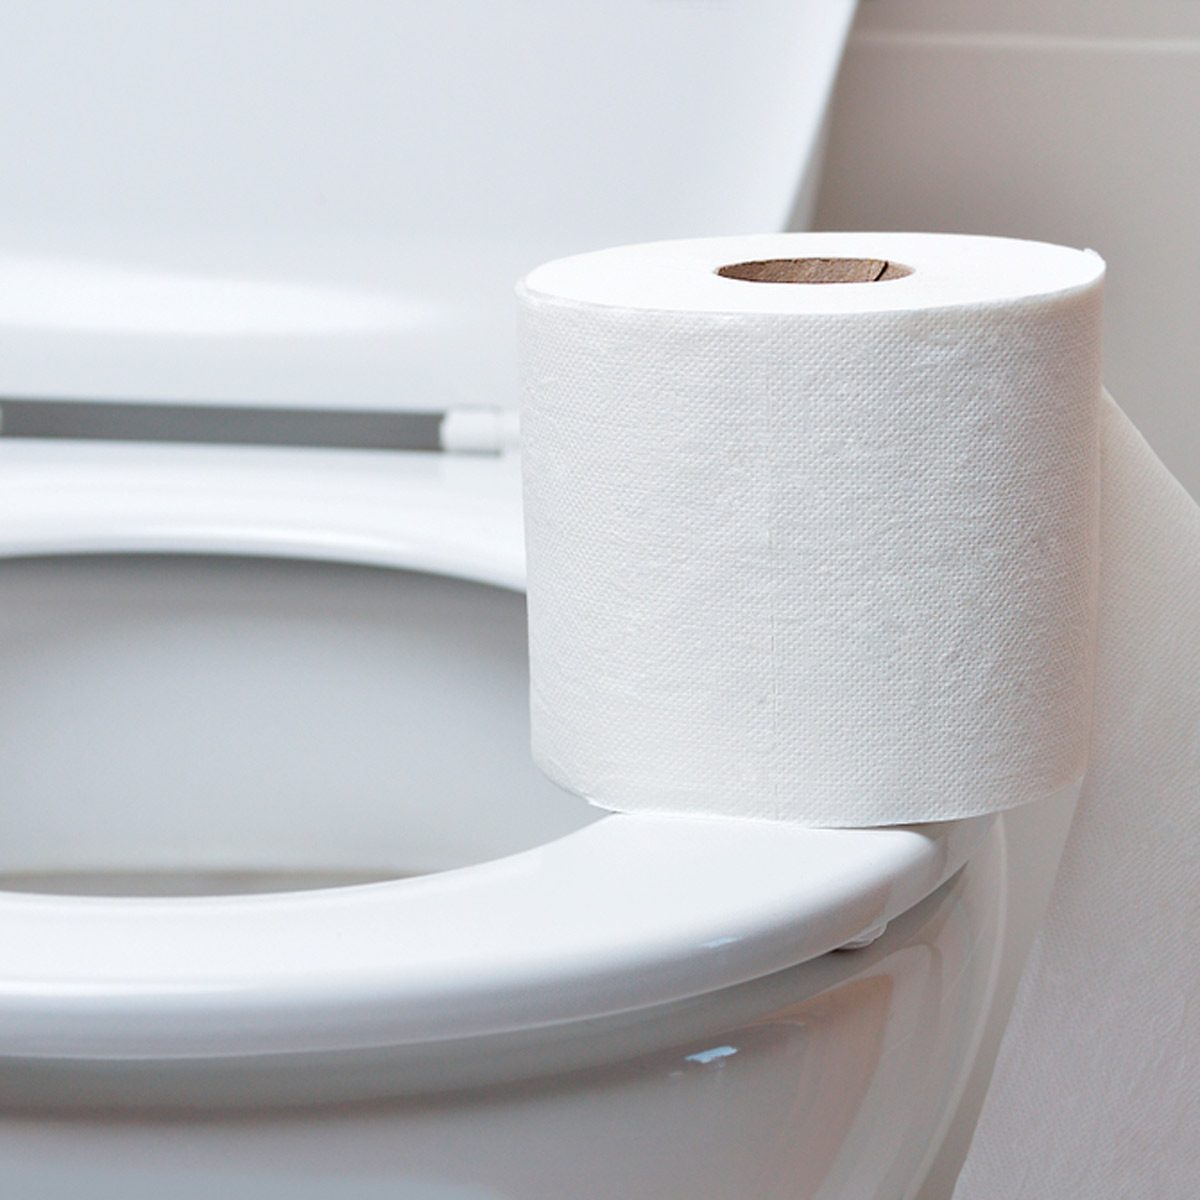 Is Expensive Toilet Paper Actually Bad for Your Toilet?